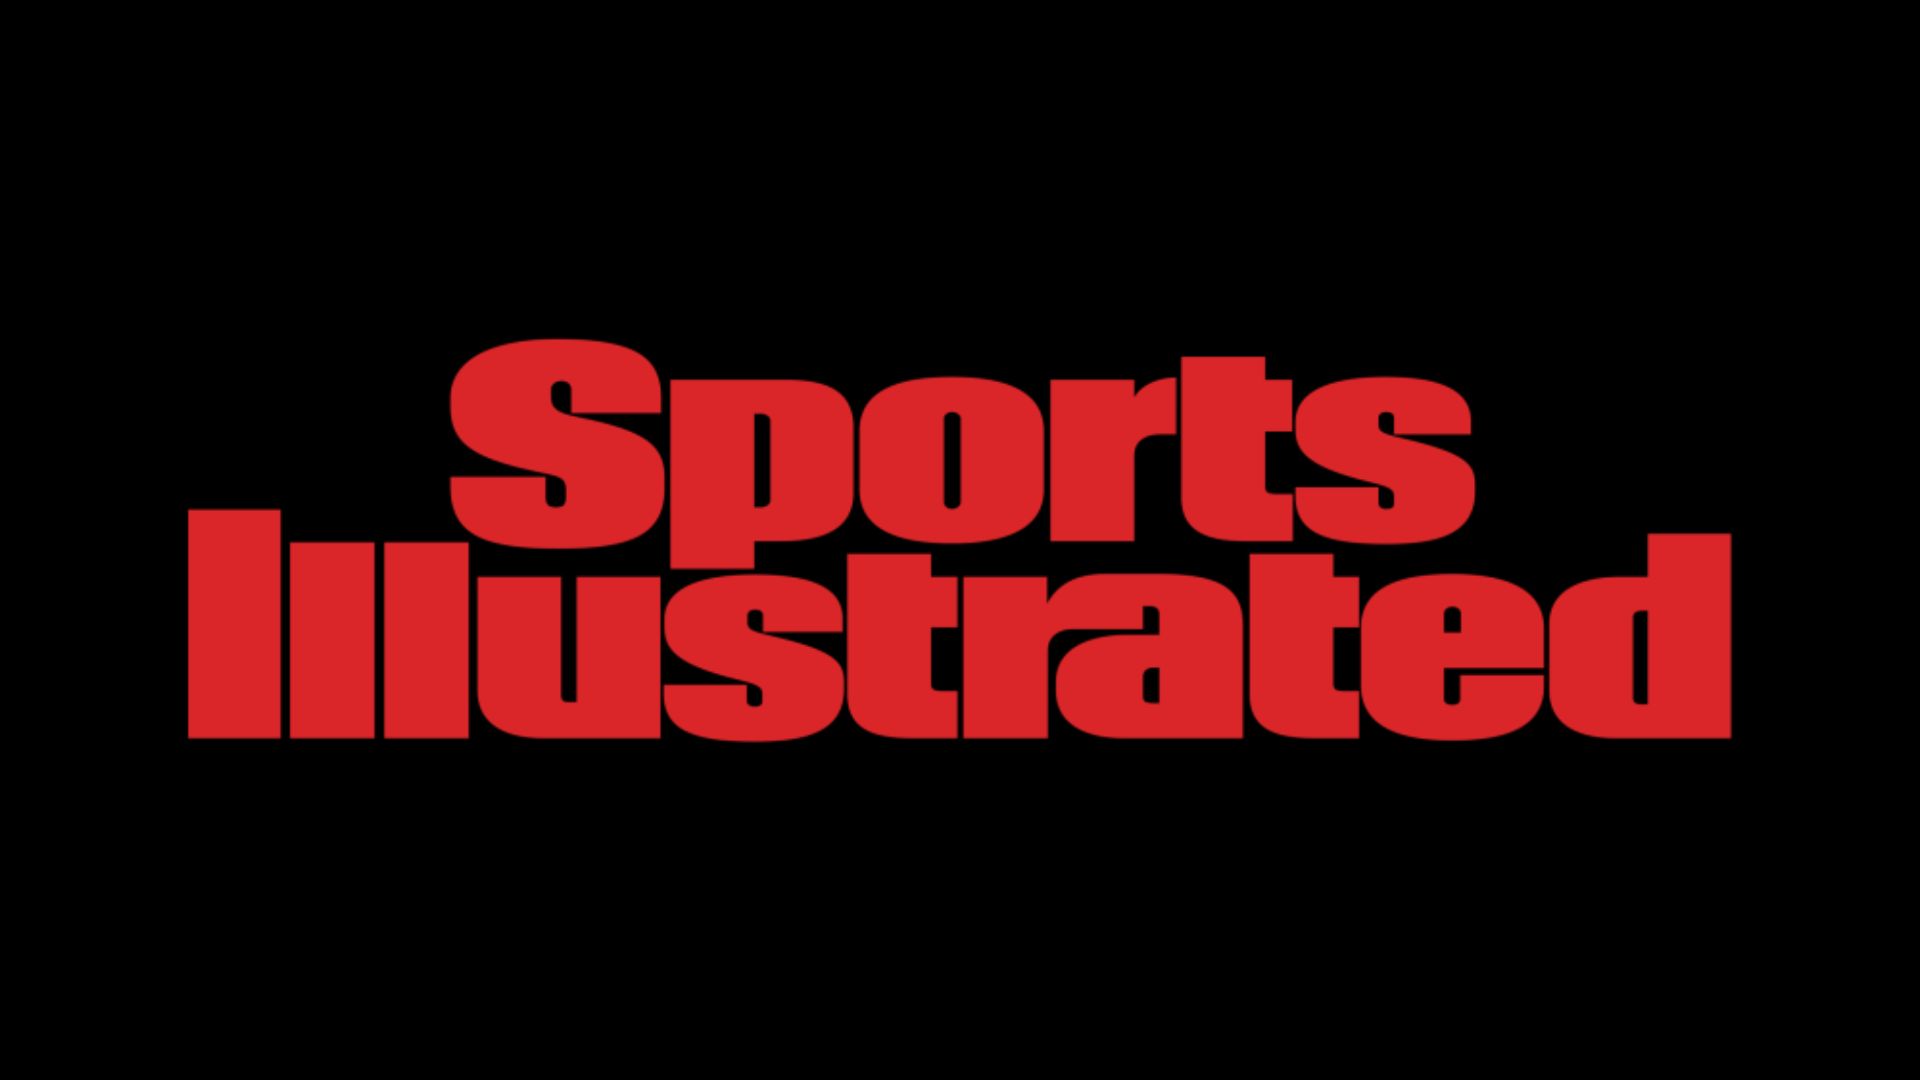 Minute Media Acquires Sports Illustrated Publishing Rights from Authentic Brands Group